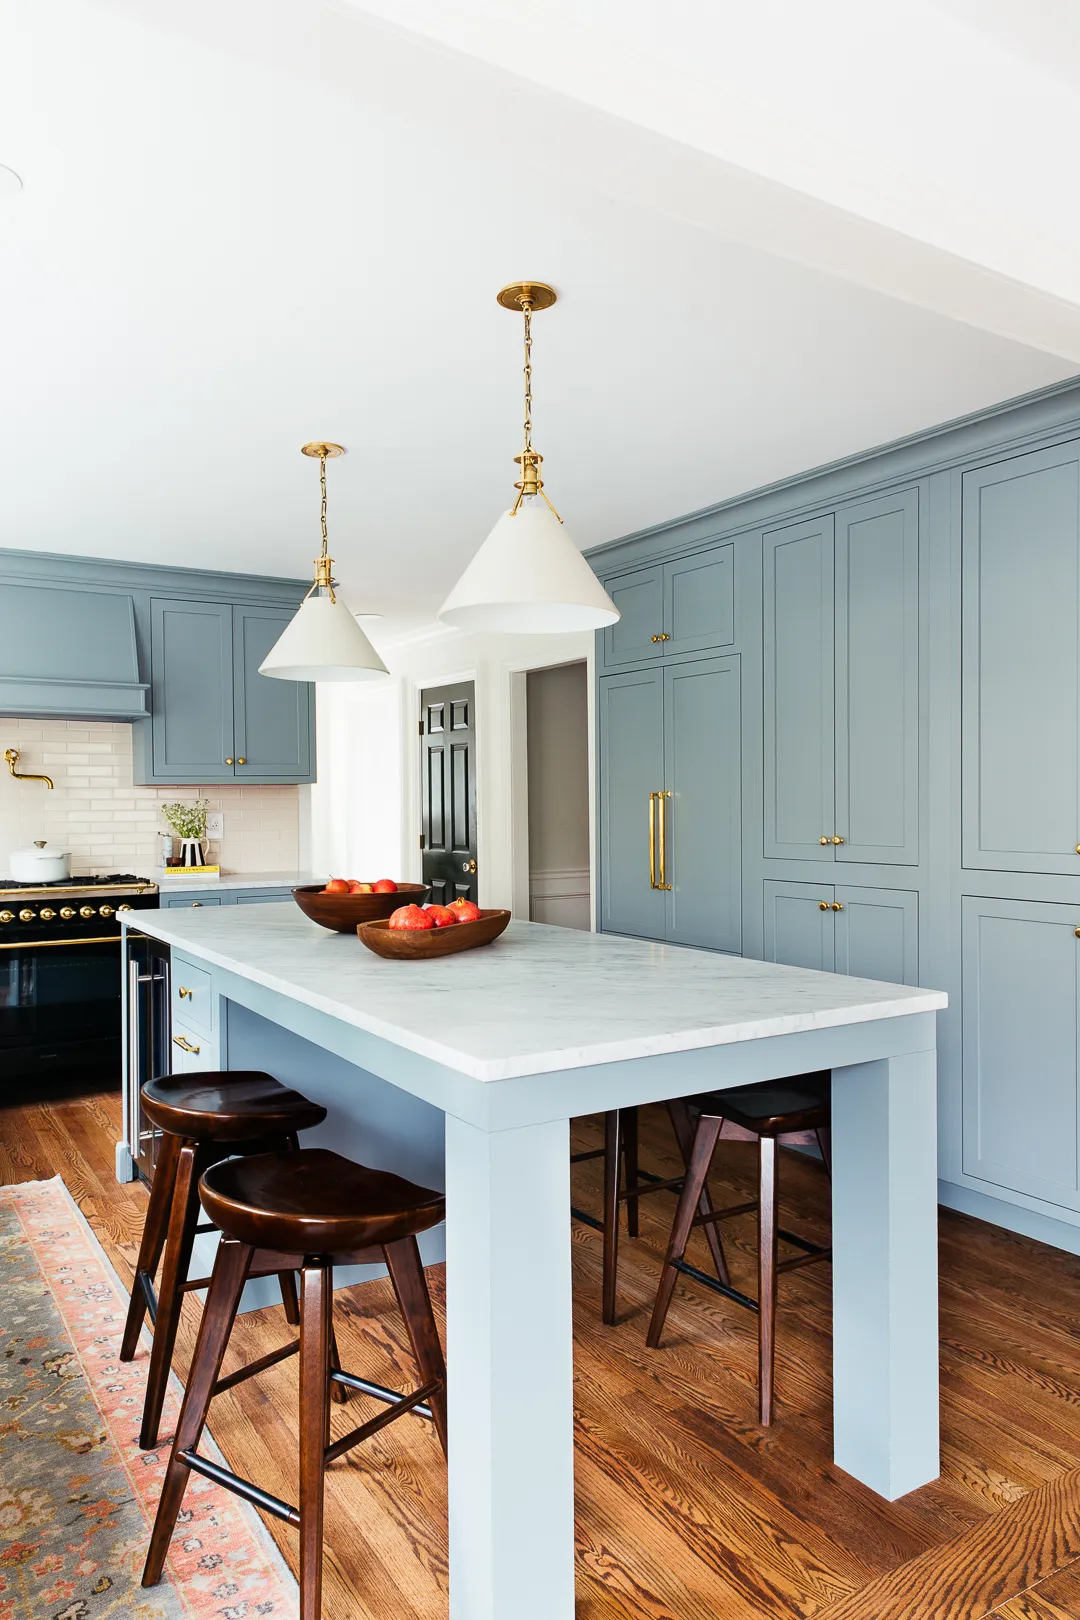 deep blue green kitchen cabinets with marble countertops, gold cabinet hardware, oak flooring